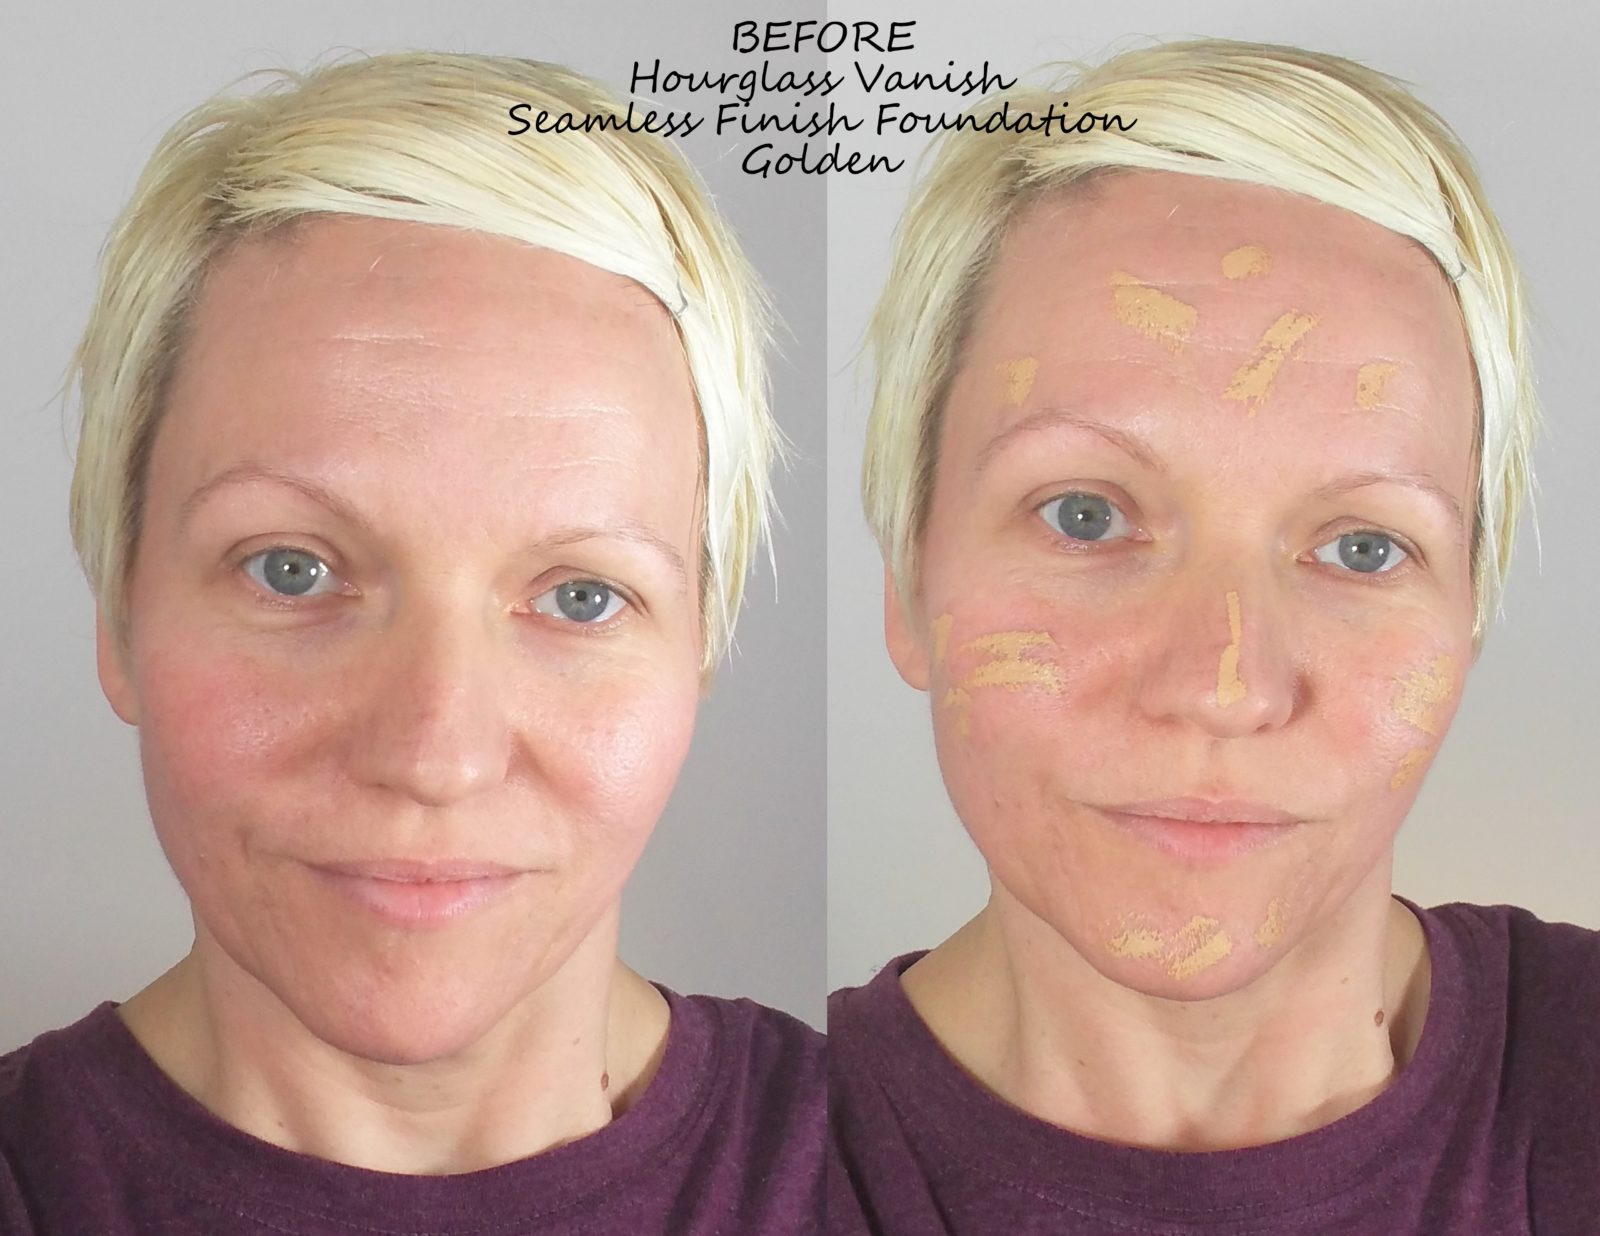 Hourglass Vanish Foundation Before and After Photos